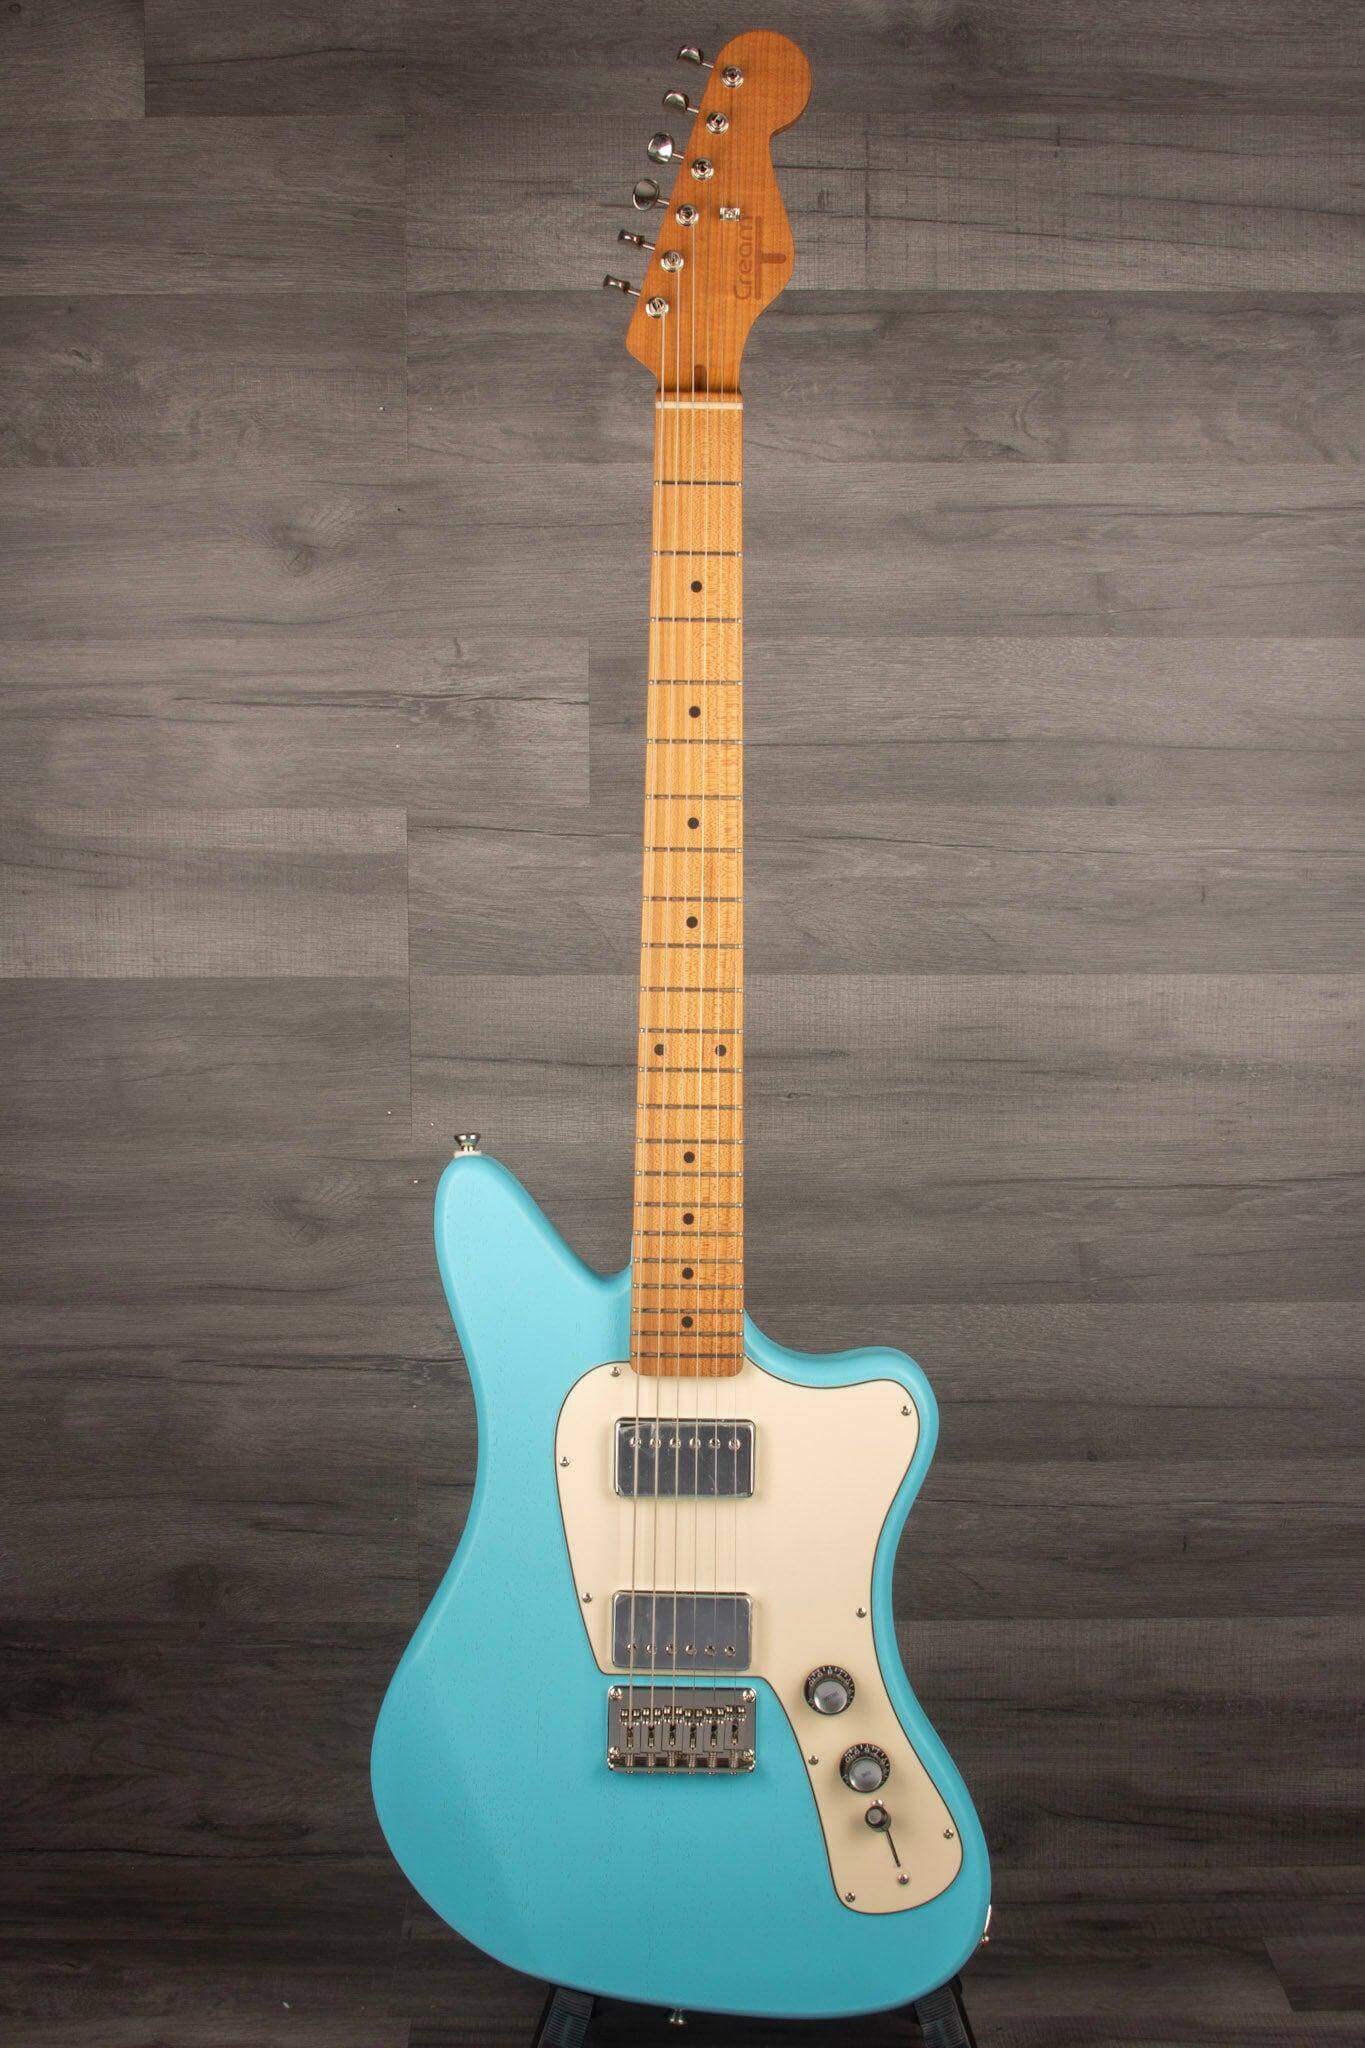 Cream T - Crossfire Standard with Pickup Swapping in Daphne Blue - MusicStreet